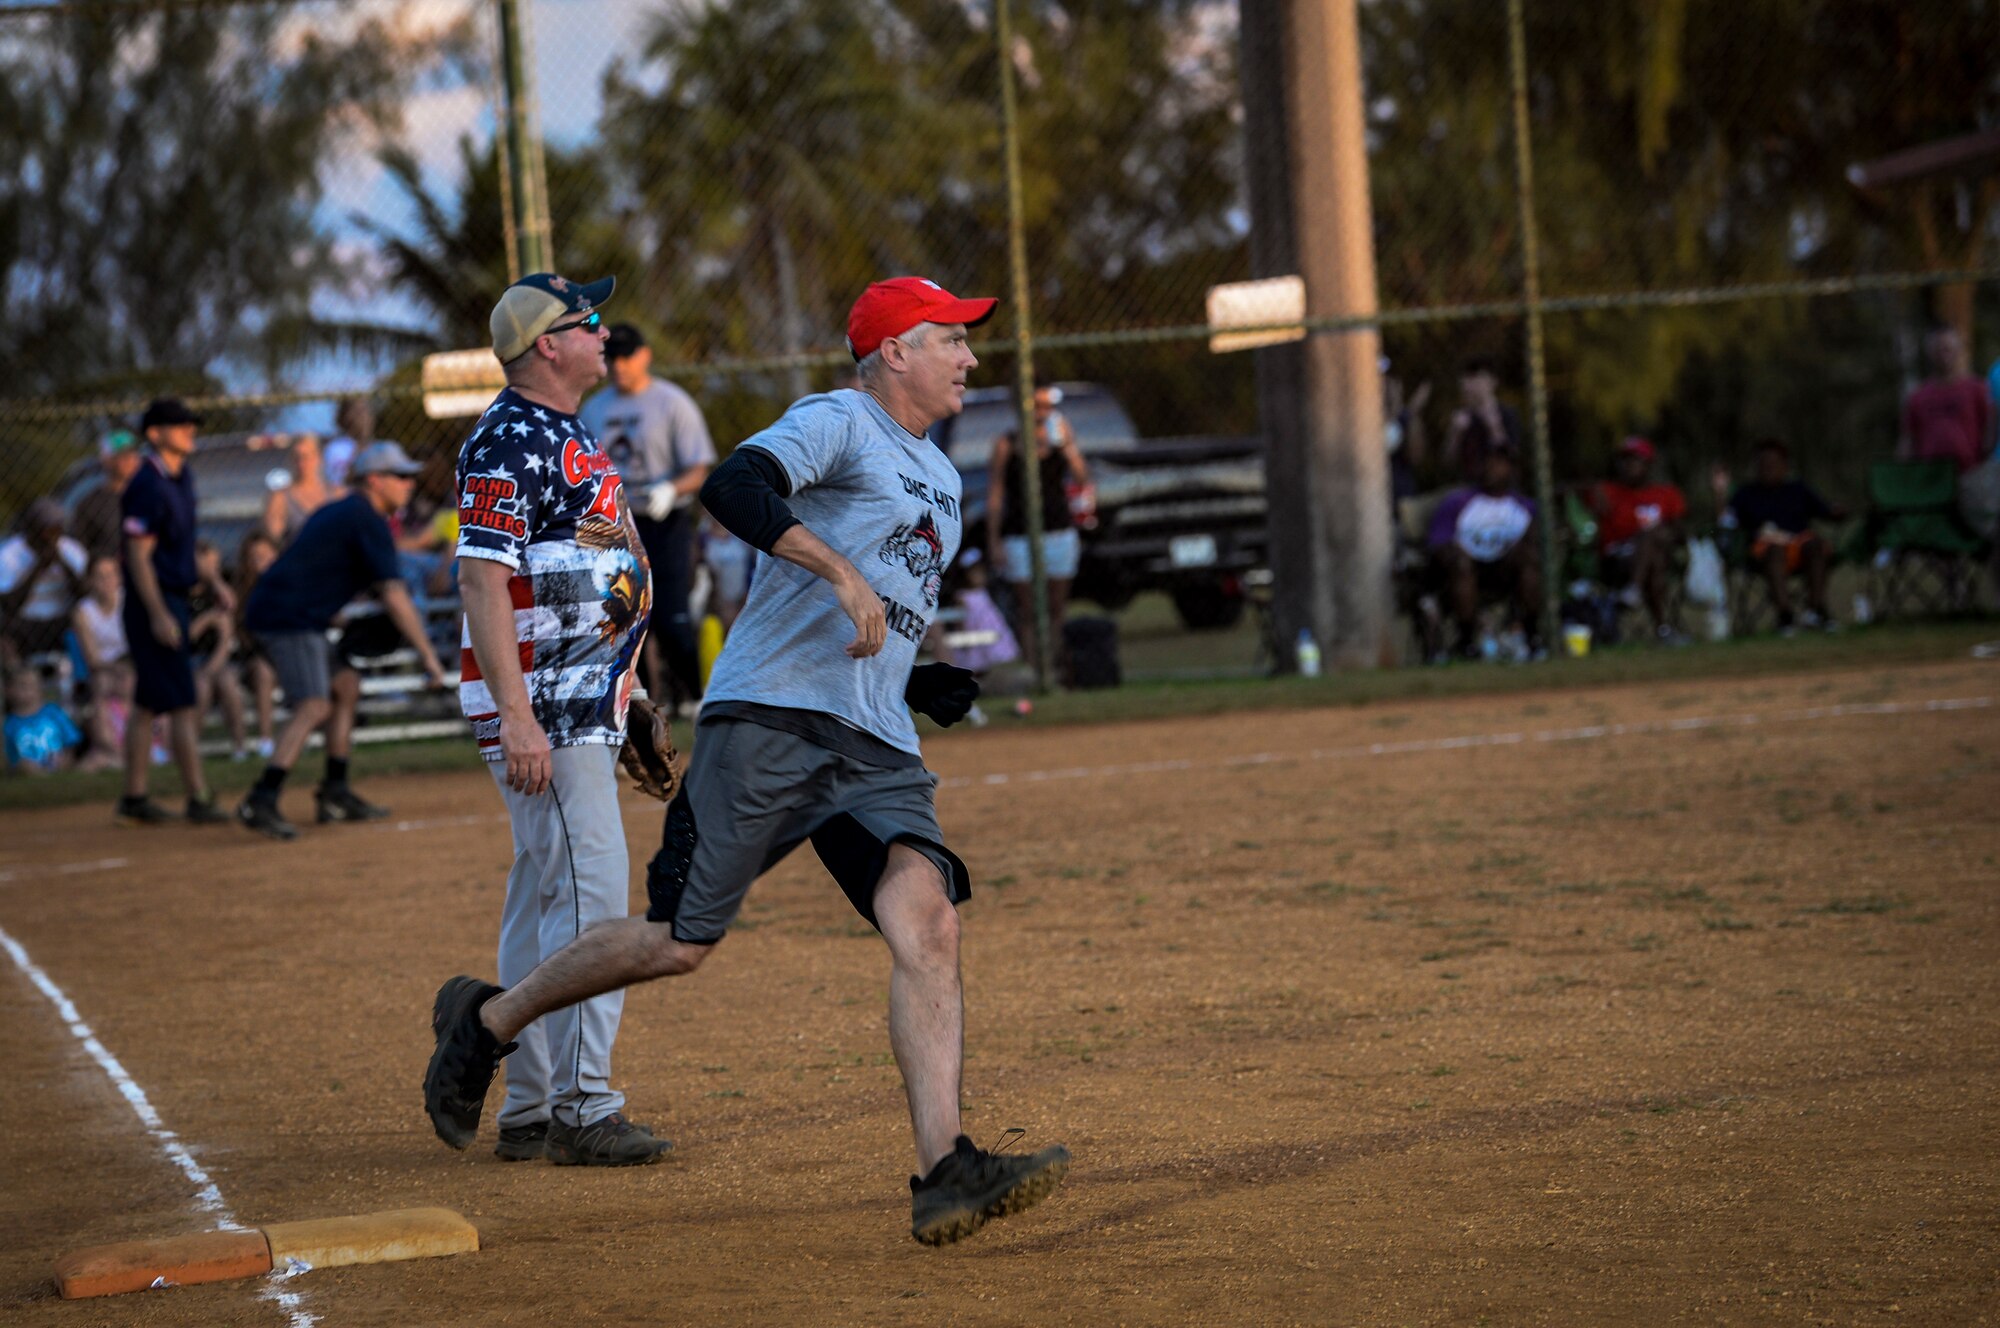 U.S. Air Force Brig. Gen. Jeremy Sloane, 36th Wing commander, runs passed first base during the Chief’s versus Eagle’s softball game at Andersen Air Force Base, Guam, June 18, 2021.